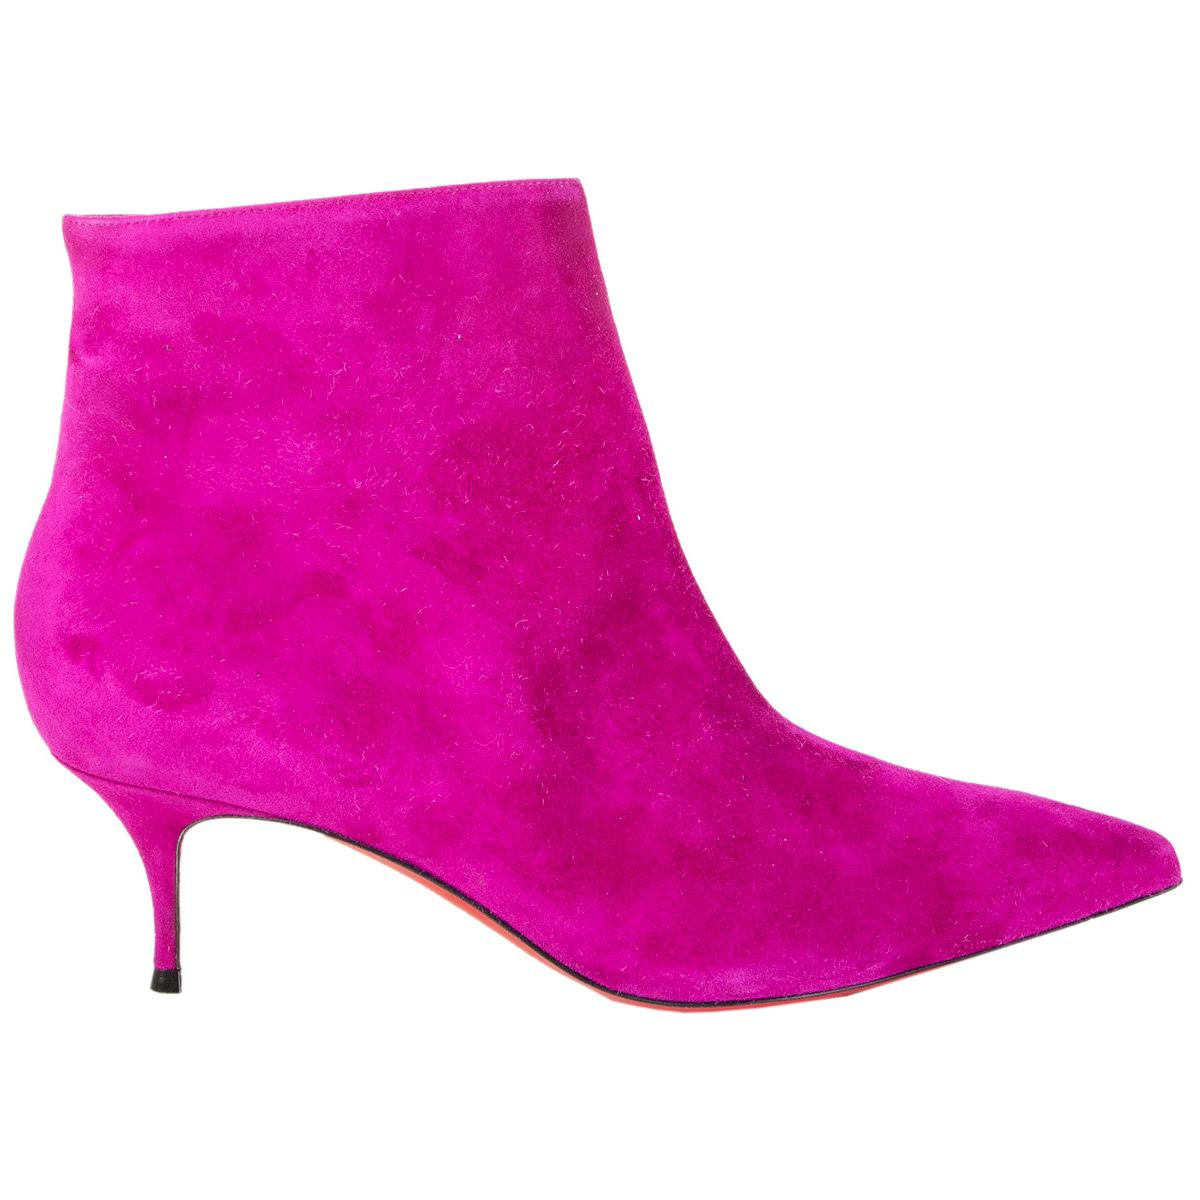 CHRISTIAN LOUBOUTIN pink suede SO KATE 55 Ankle Boots Shoes 38.5